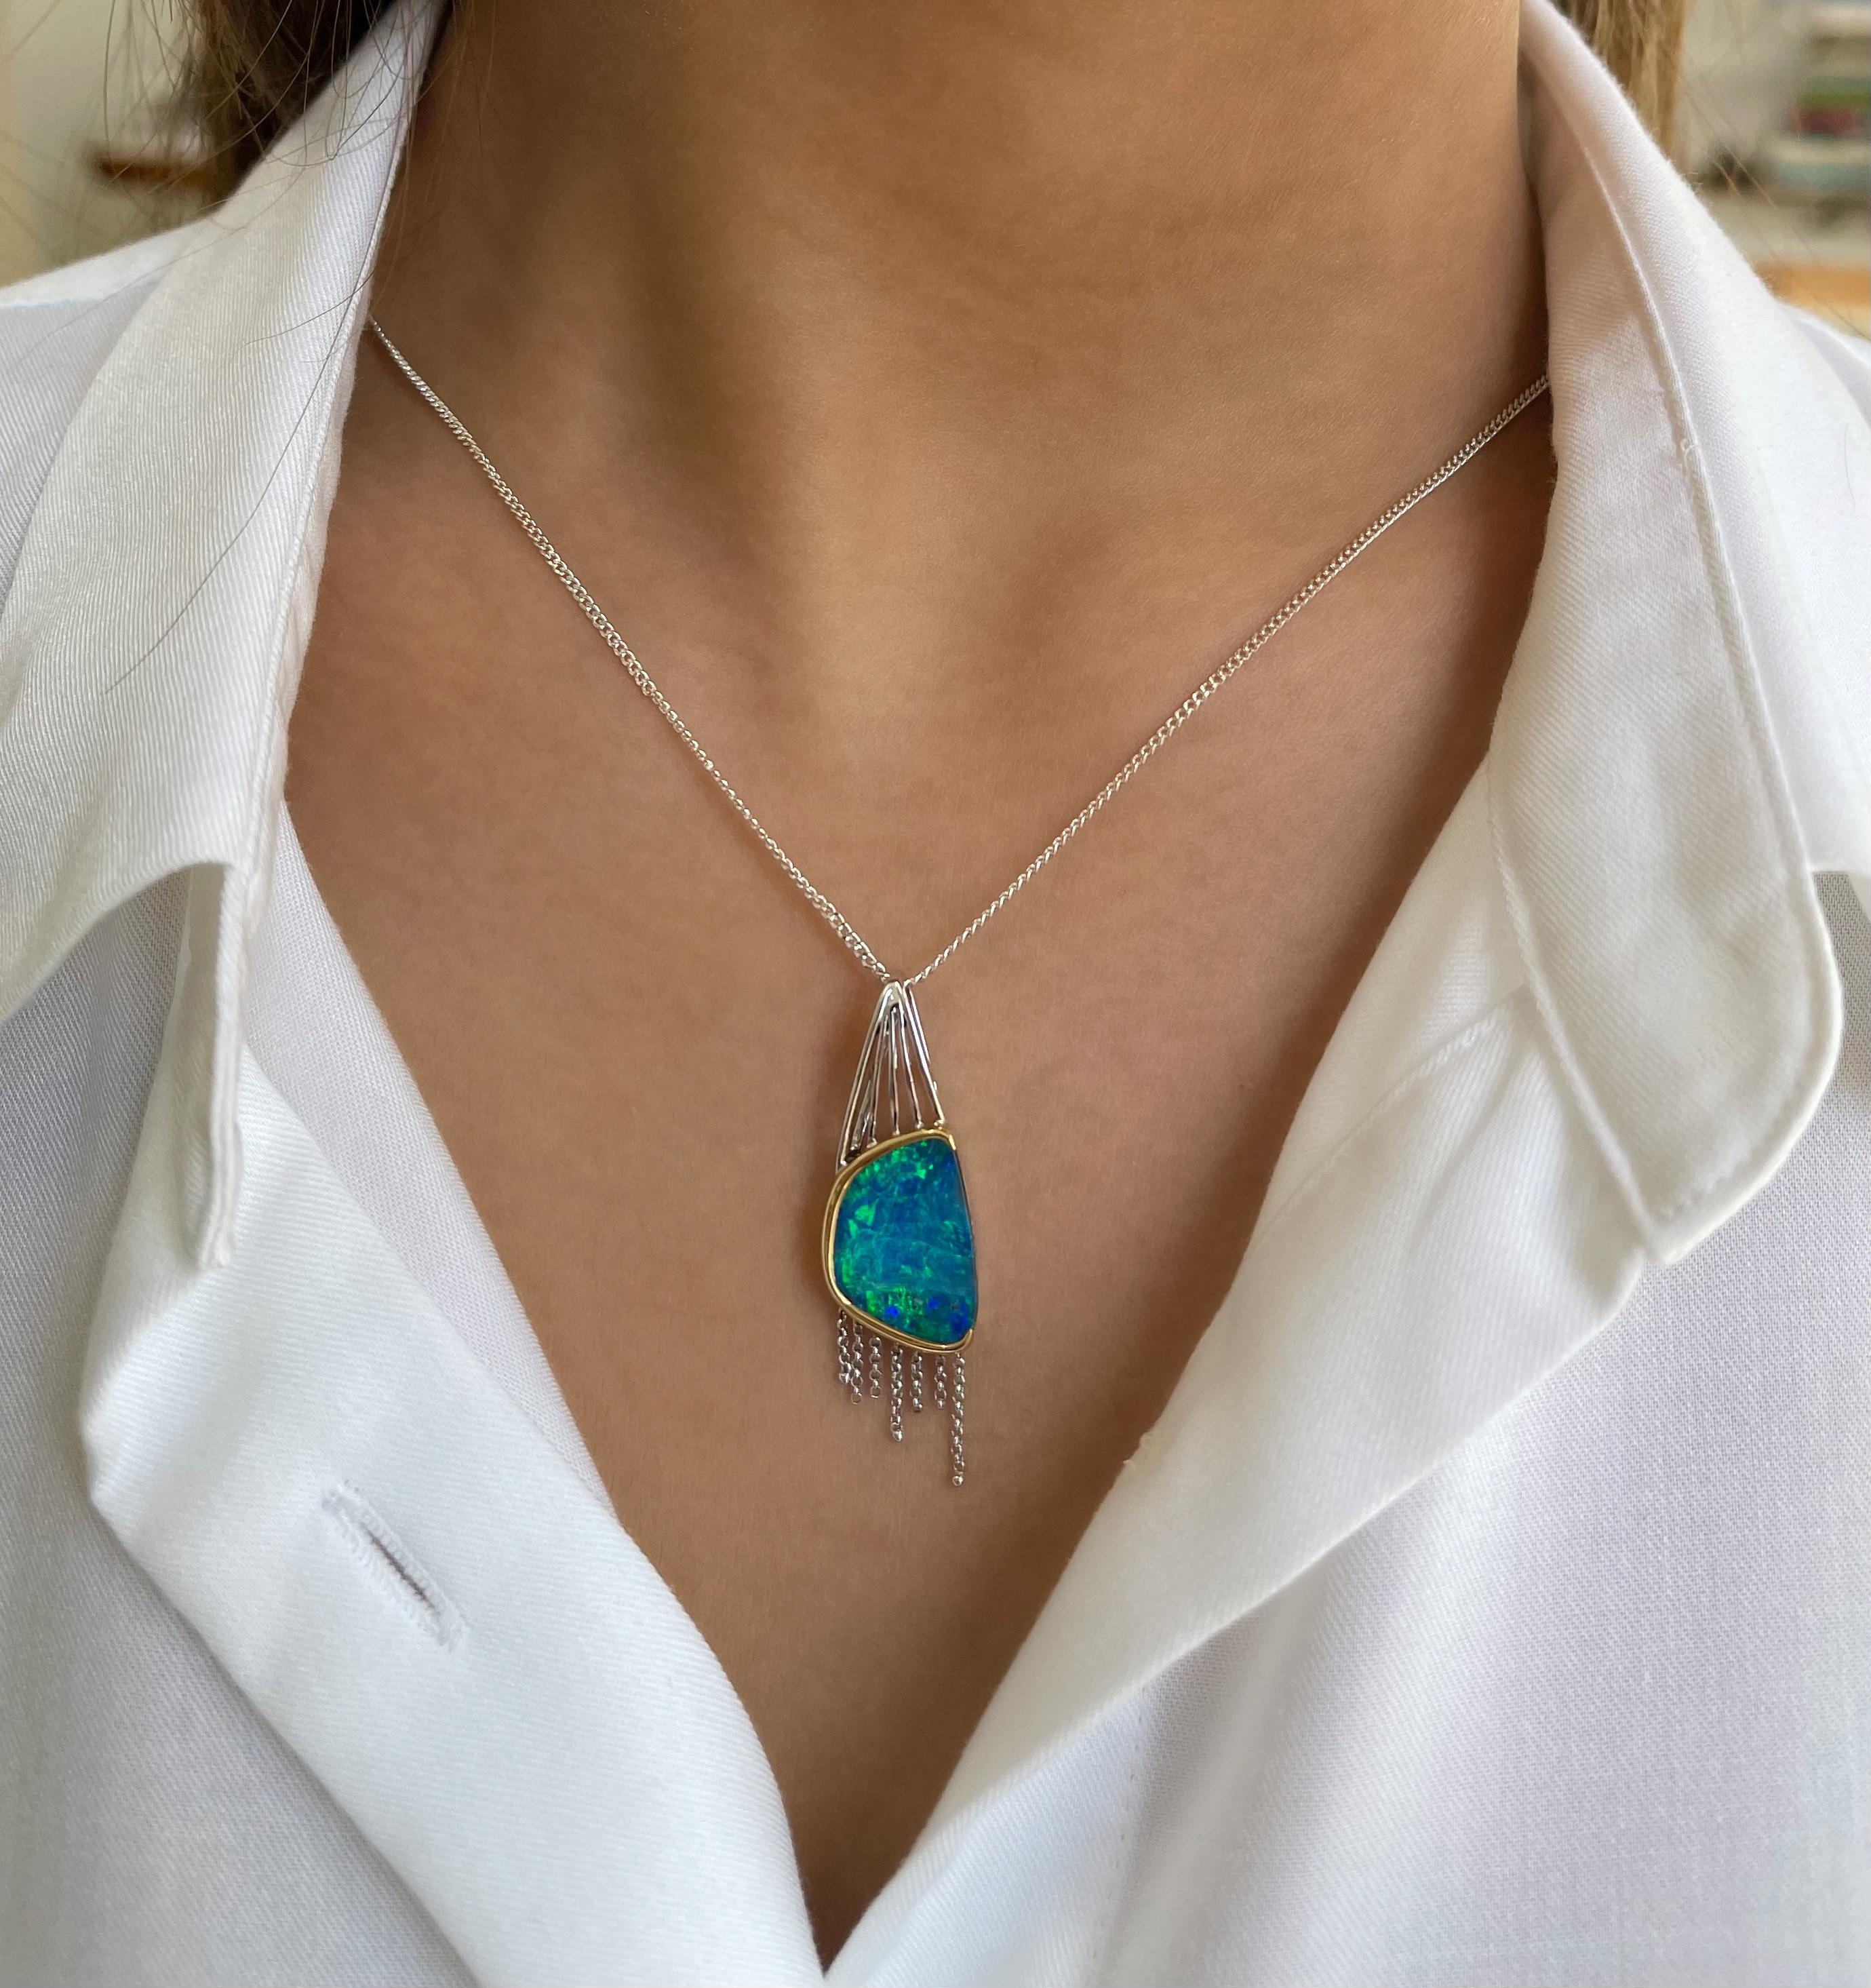 Enticing and elegant, the ‘Waves’ pendant will bring you joy and pleasure with such an electrifying boulder opal (5.19ct). The natural gemstone sourced from Winton mines in Queensland, Australia, is masterfully crafted in classic 18 karats white and